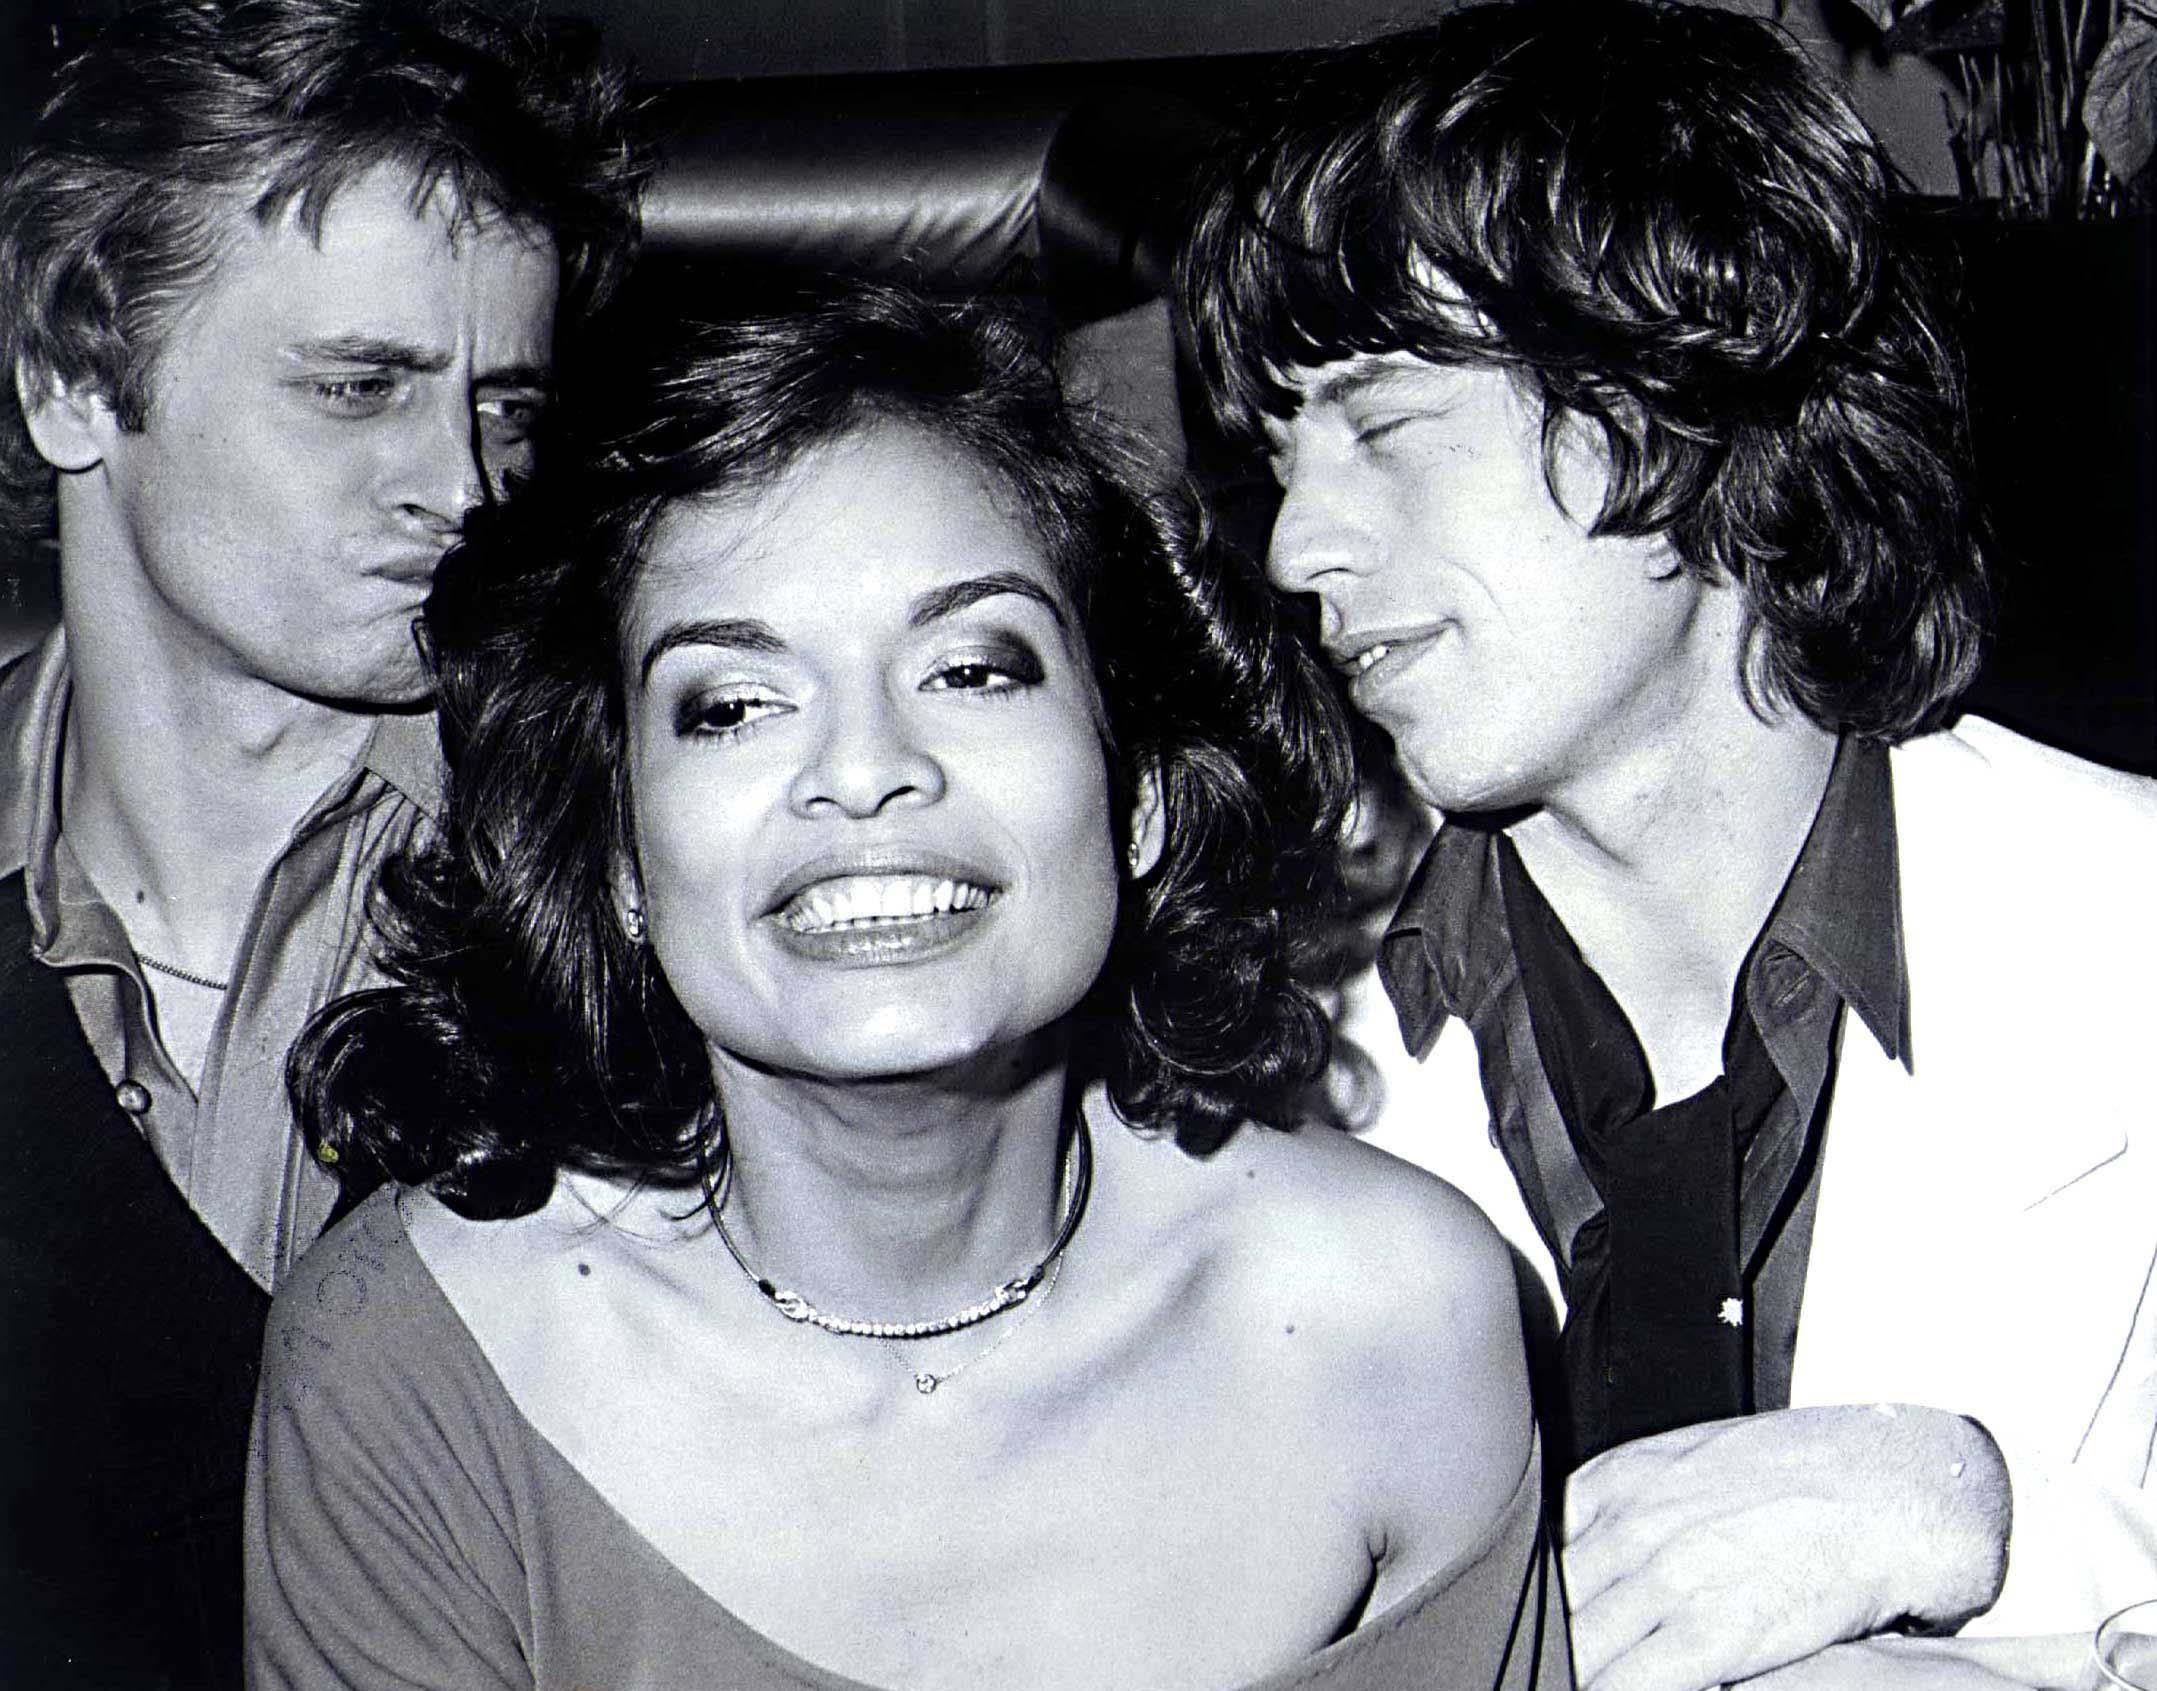 Eric Kroll Black and White Photograph - Bianca Jagger's Birthday Party at Studio 54 Fine Art Print